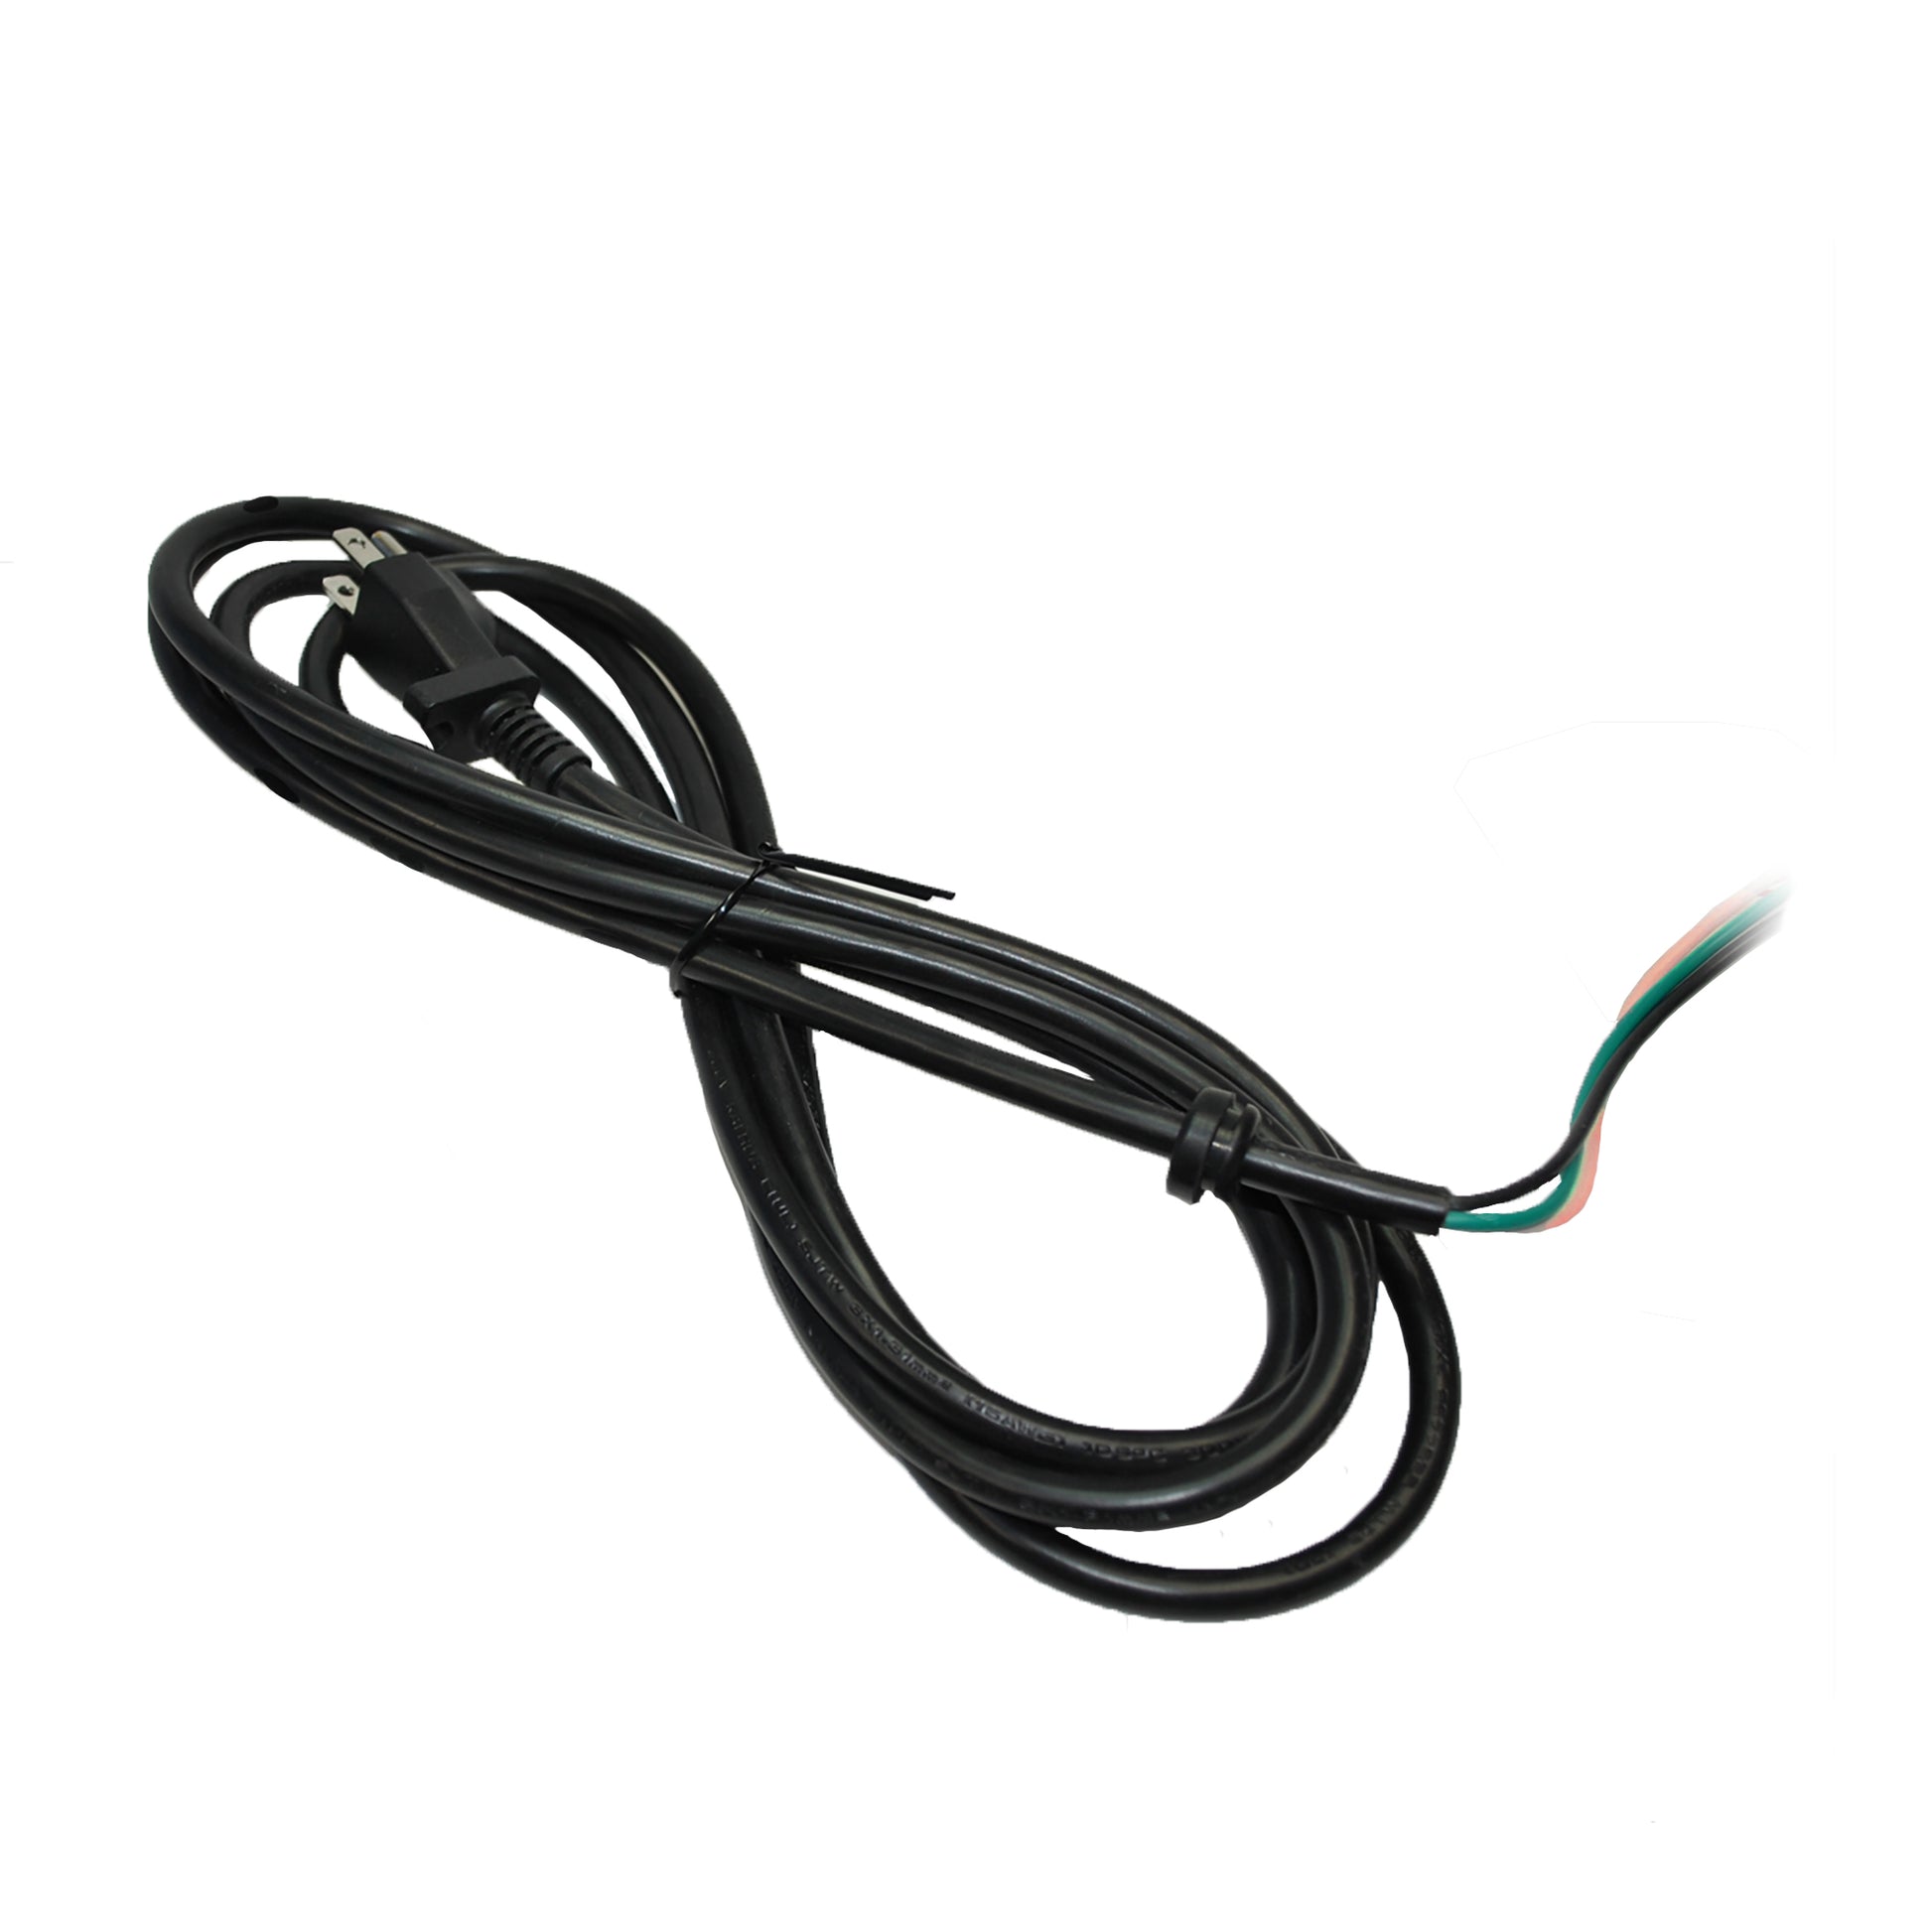 Power Cord for X-8, X-12 Confined Space Fans